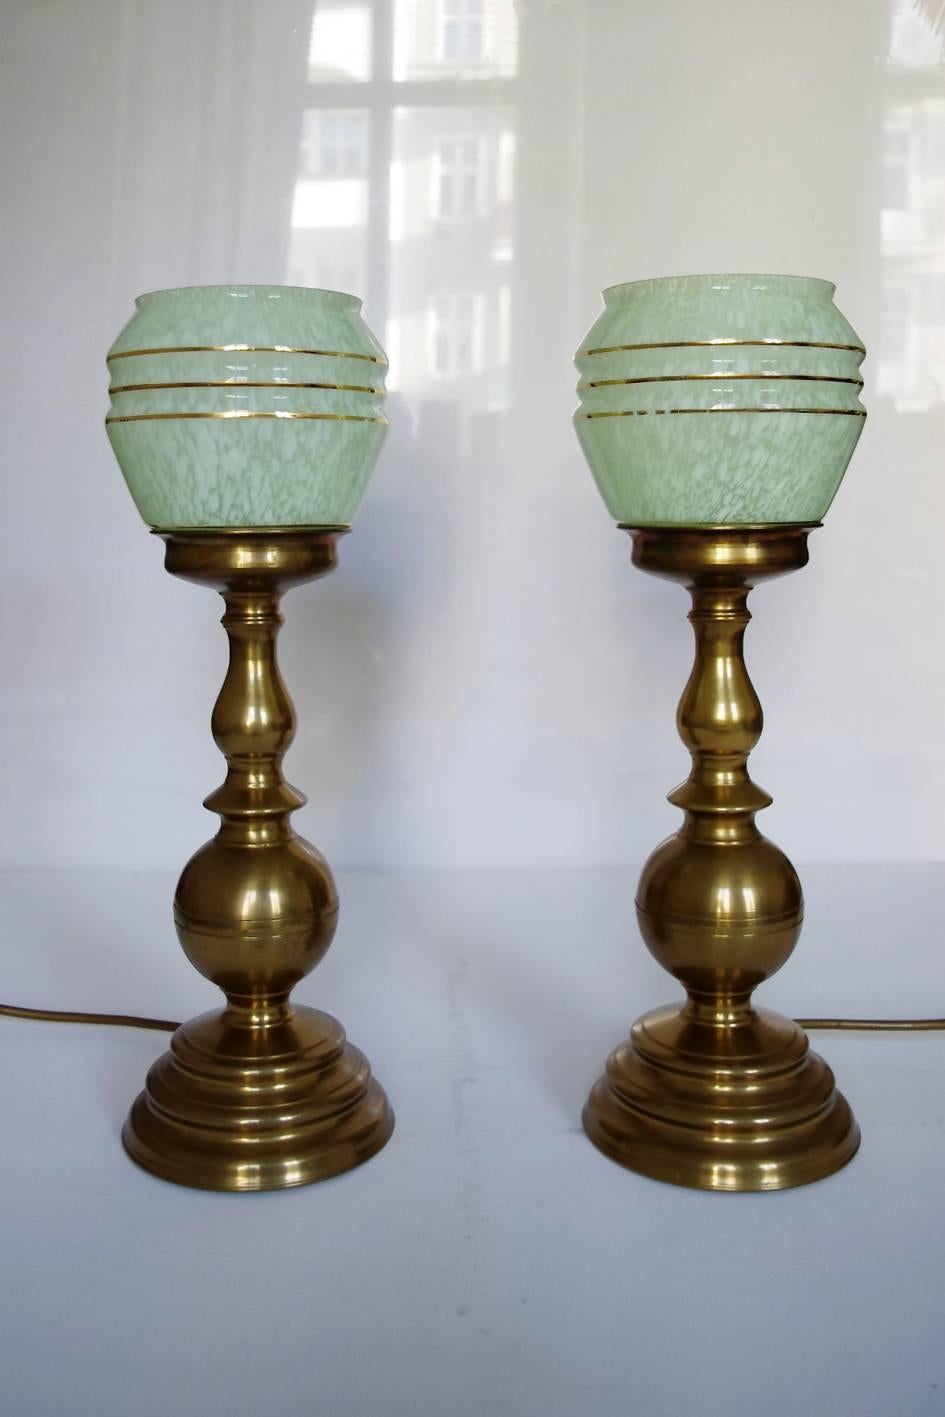  Pair of Beautiful German Vintage Art Deco Brass and Glass Table Lights 1950s In Good Condition For Sale In Berlin, DE